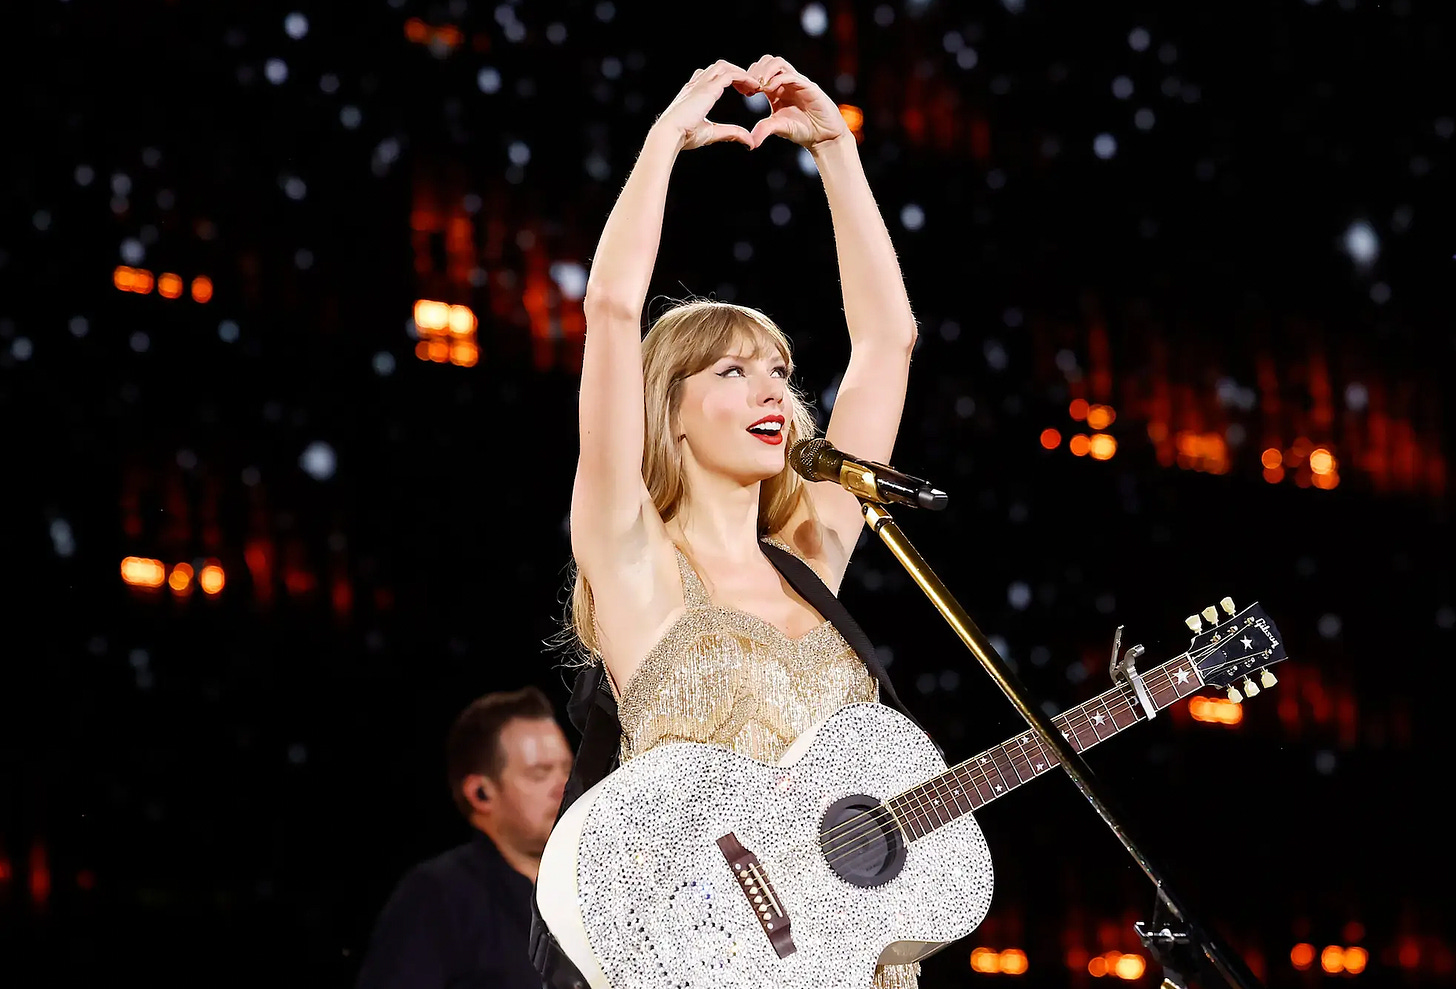 Taylor Swift holding up a hand heart during the Fearless set at her Eras Tour.